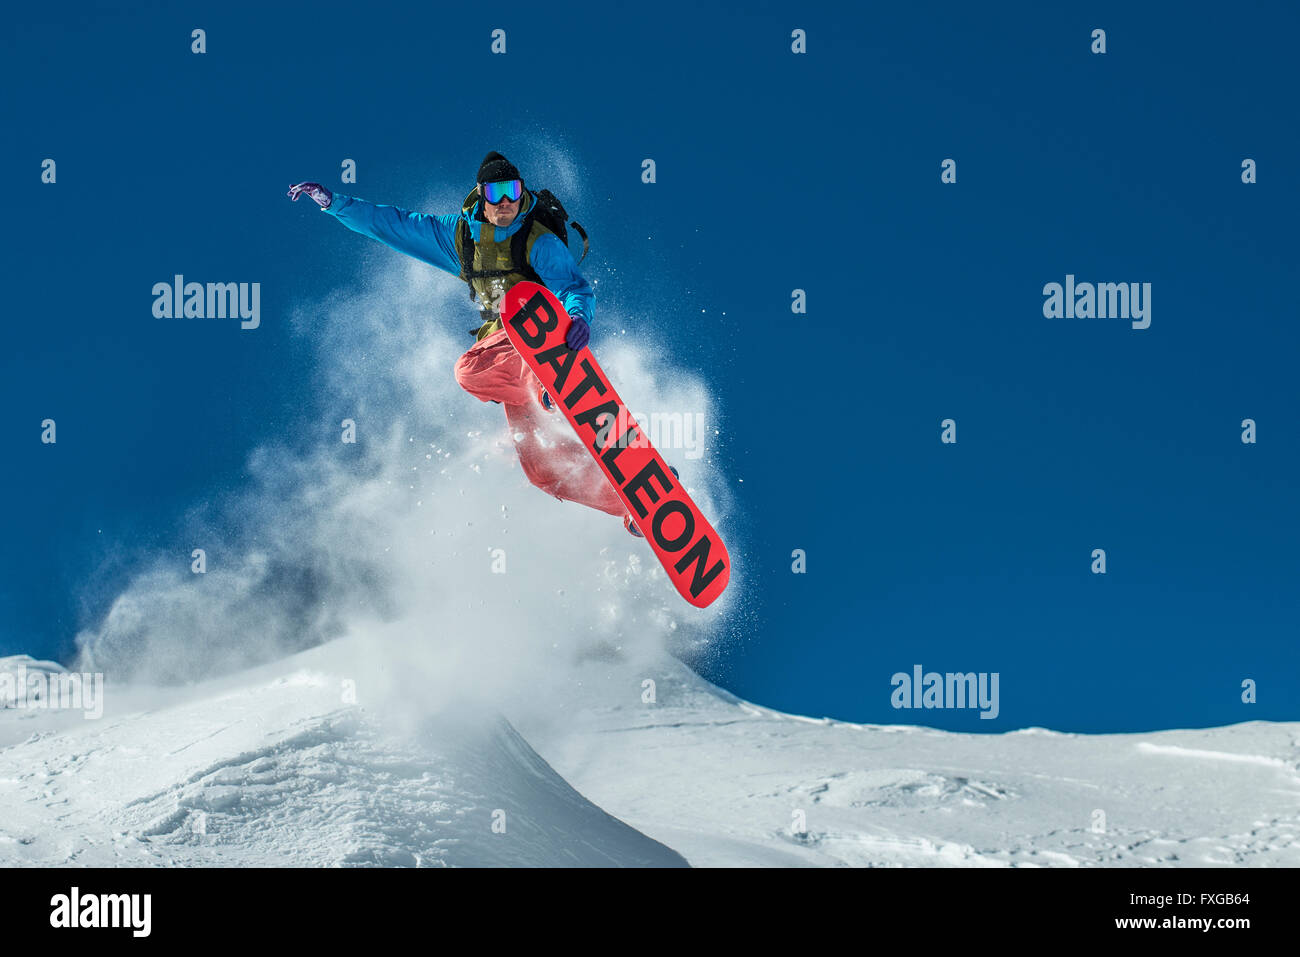 A snowboarder jumps off piste in powder snow in the French ski resort of Courchevel. Stock Photo